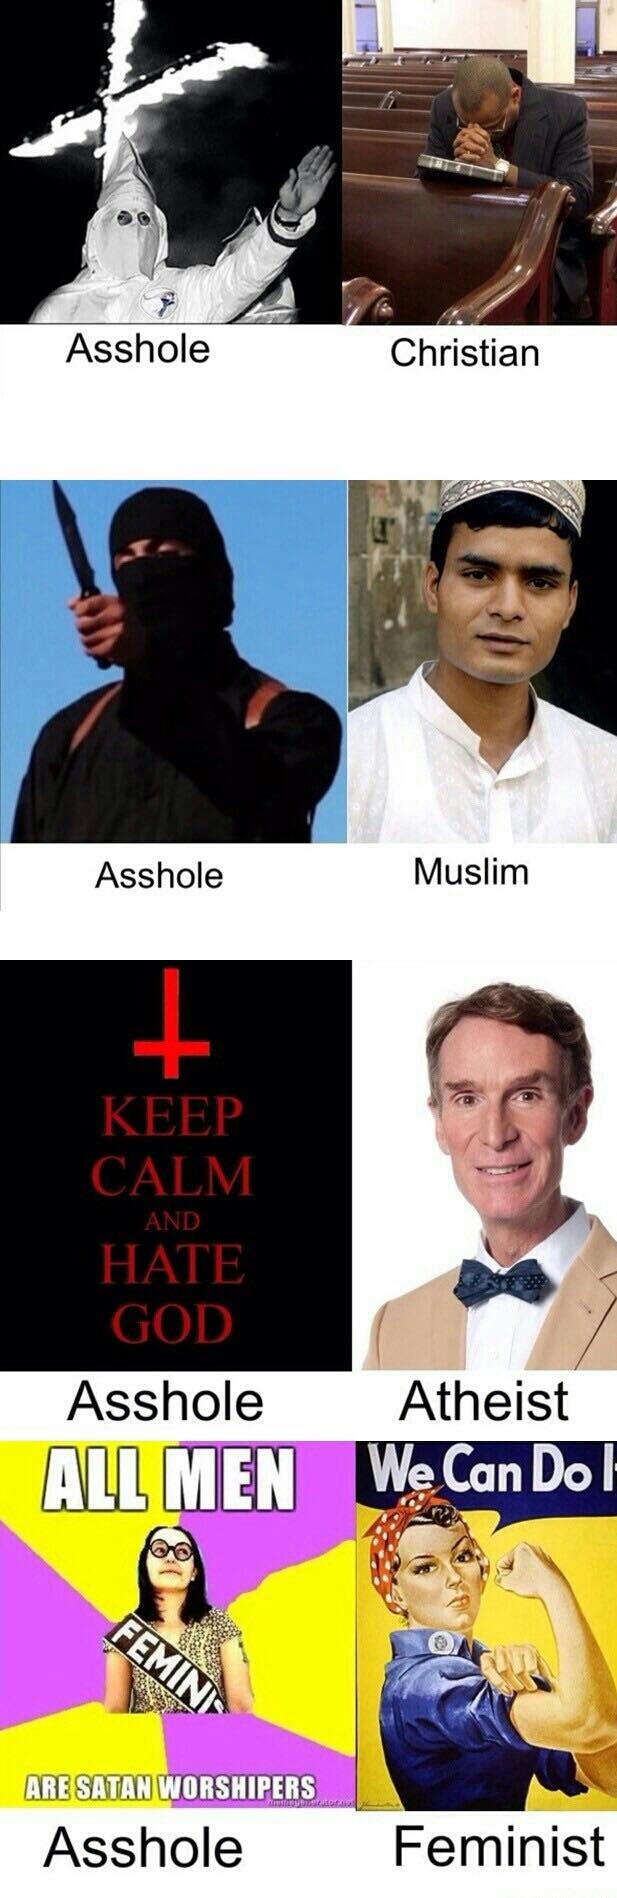 know the difference between an asshole and these other groups, christian, muslim, atheists, feminists